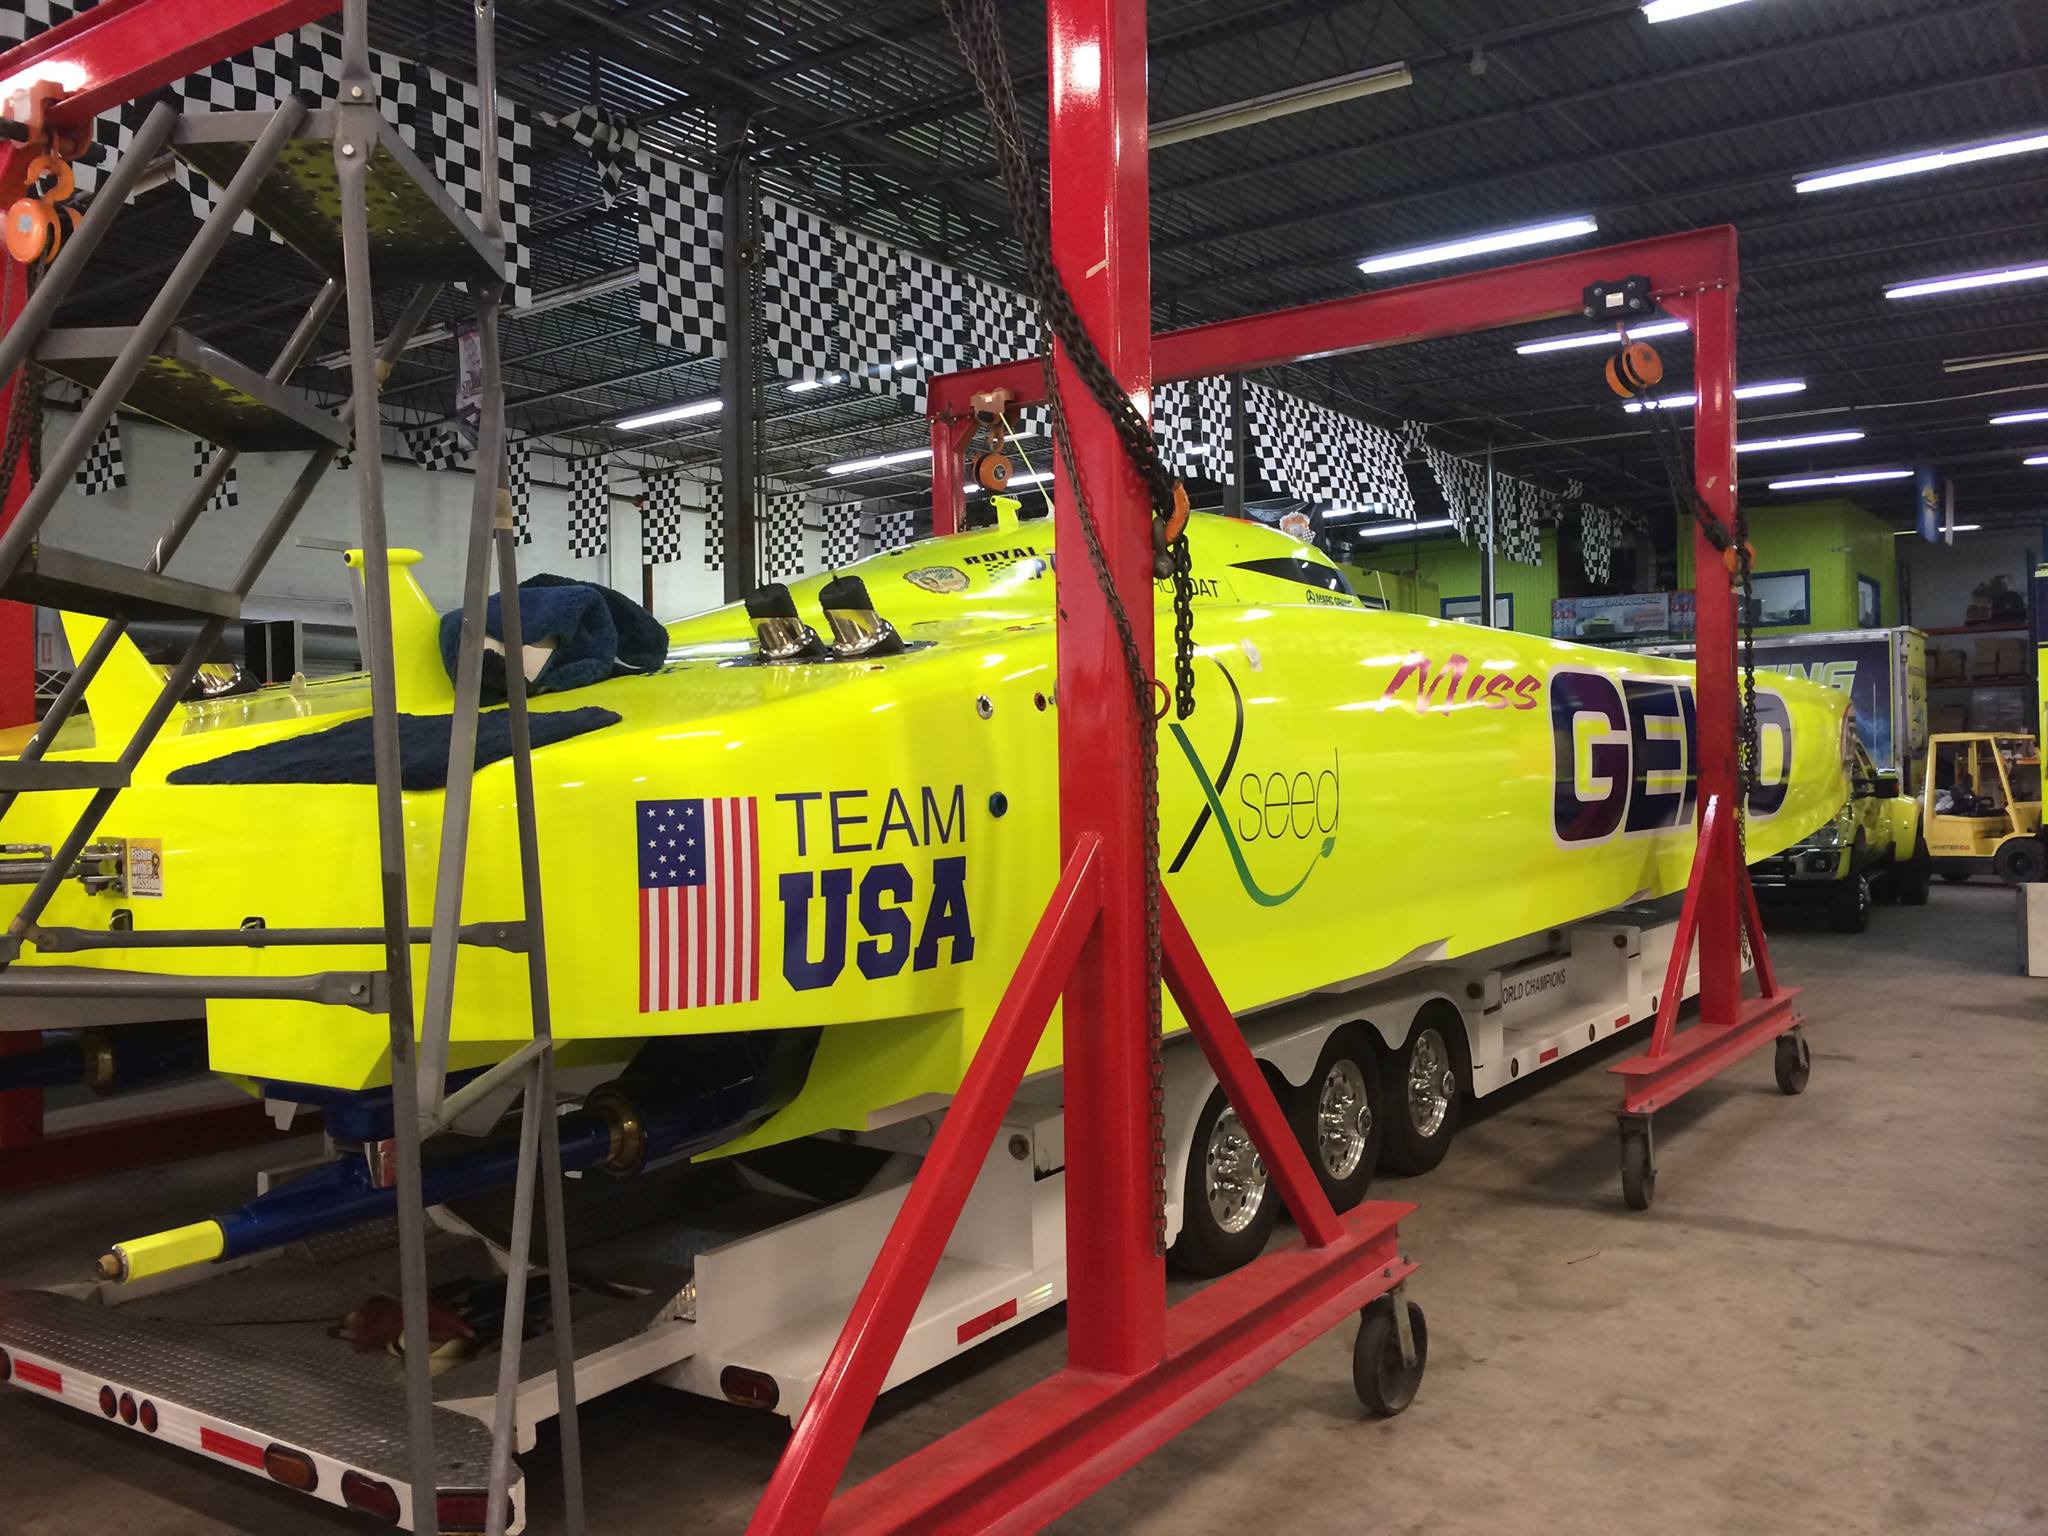 Where Boats Meet Bikes: Miss GEICO and OCC Team Up